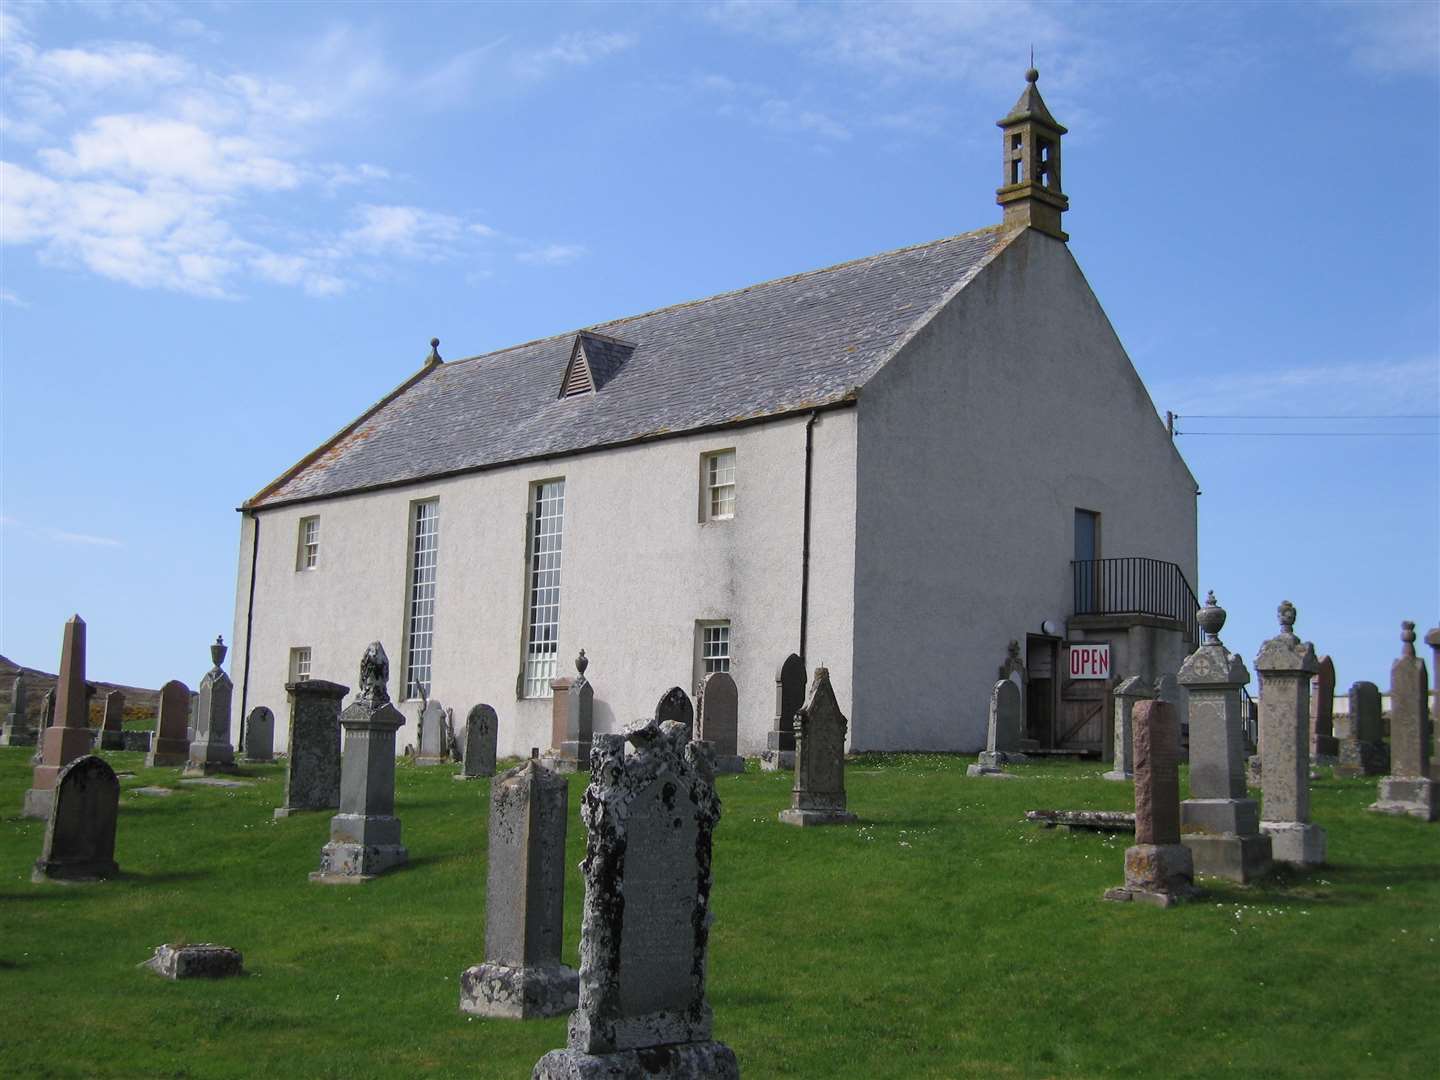 A £2.3 million project is under way to turn Strathnaver Museum into a "world-class visitor destination".